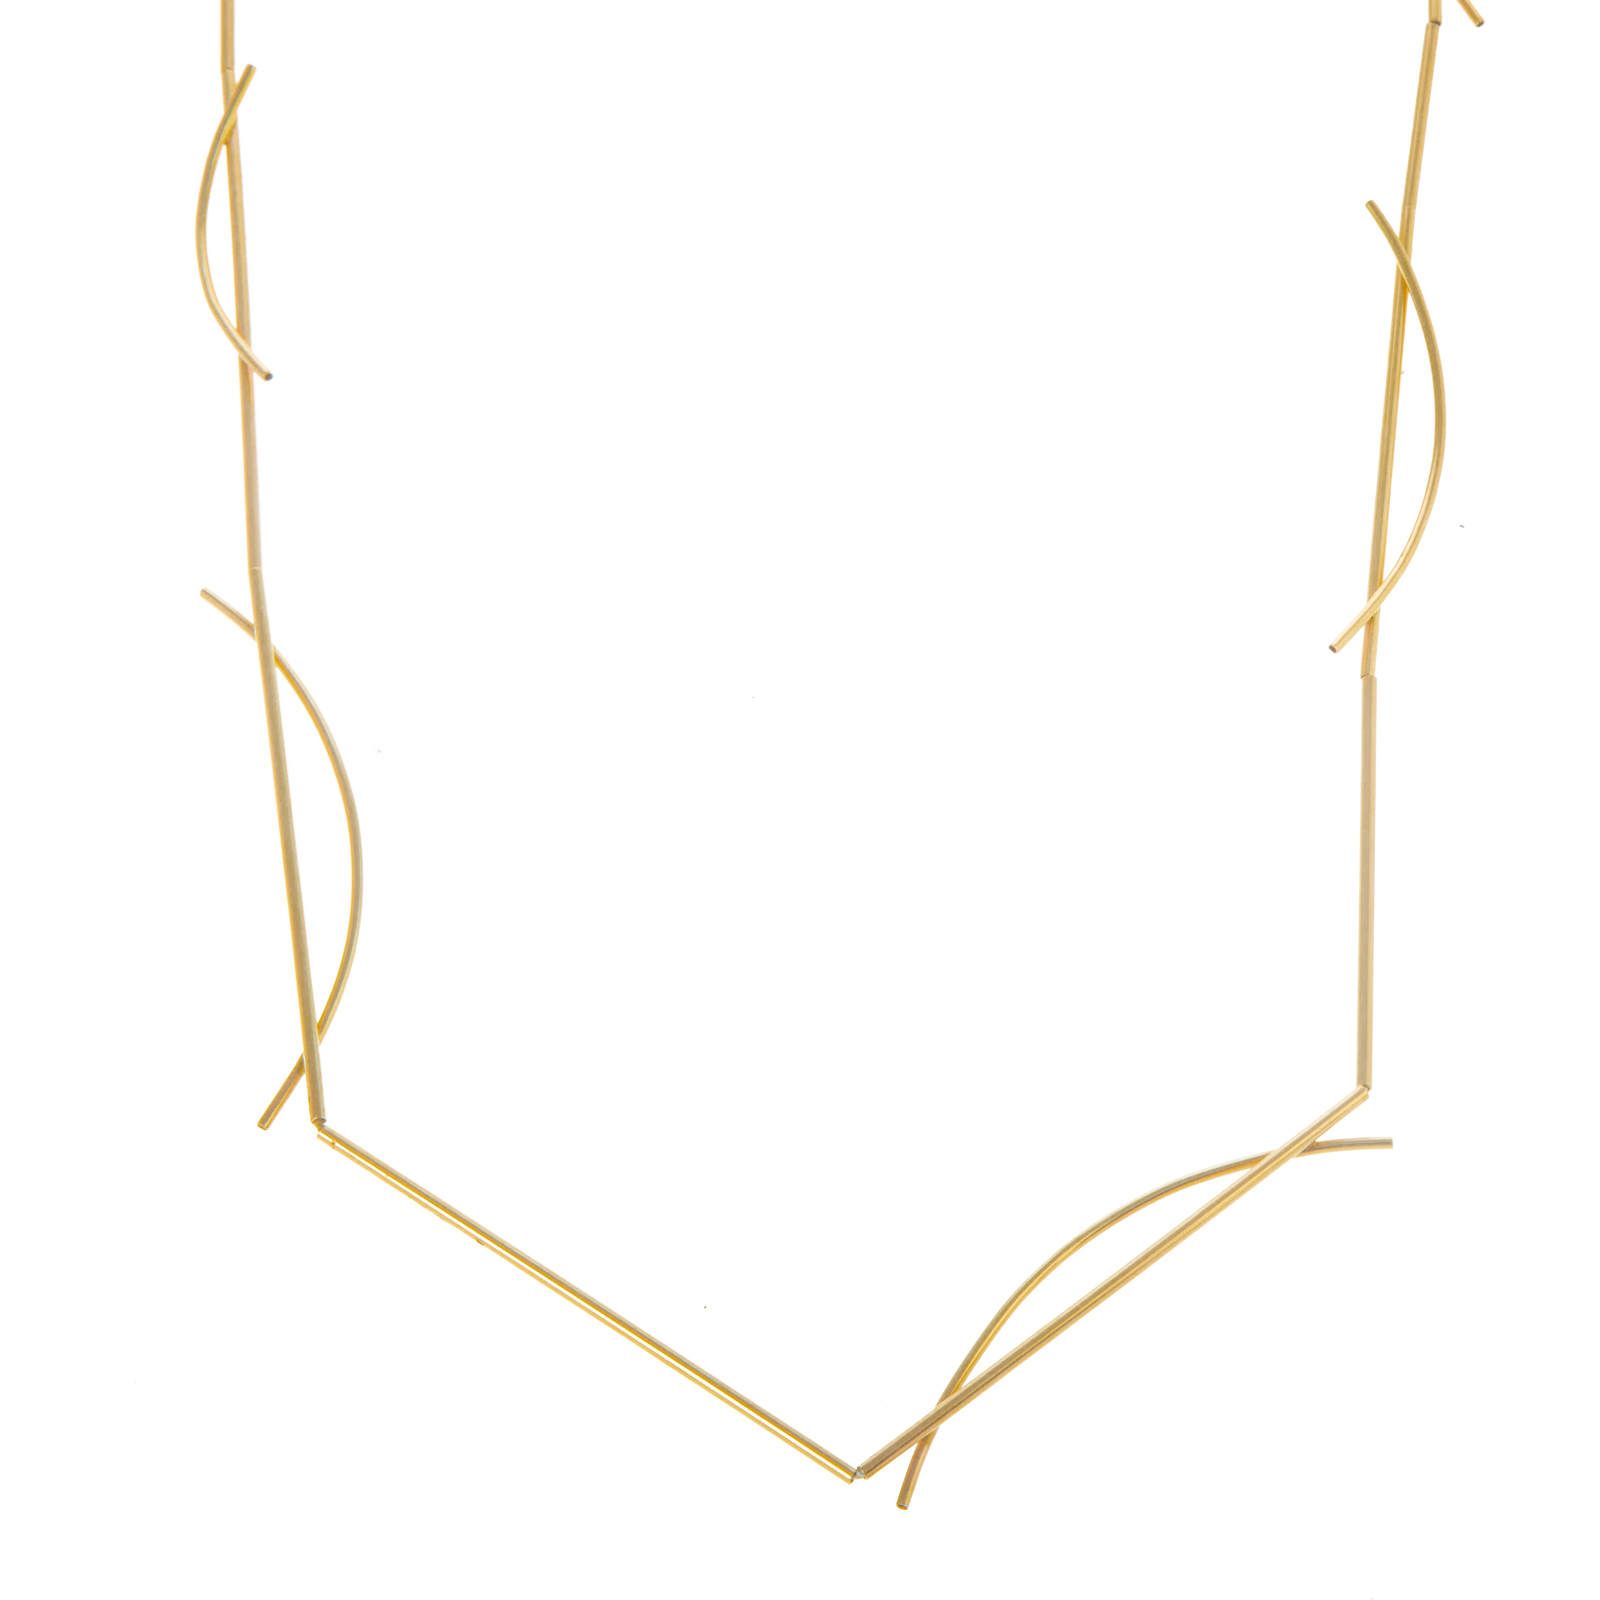 A LONG 14K YELLOW GOLD MODERNIST NECKLACE